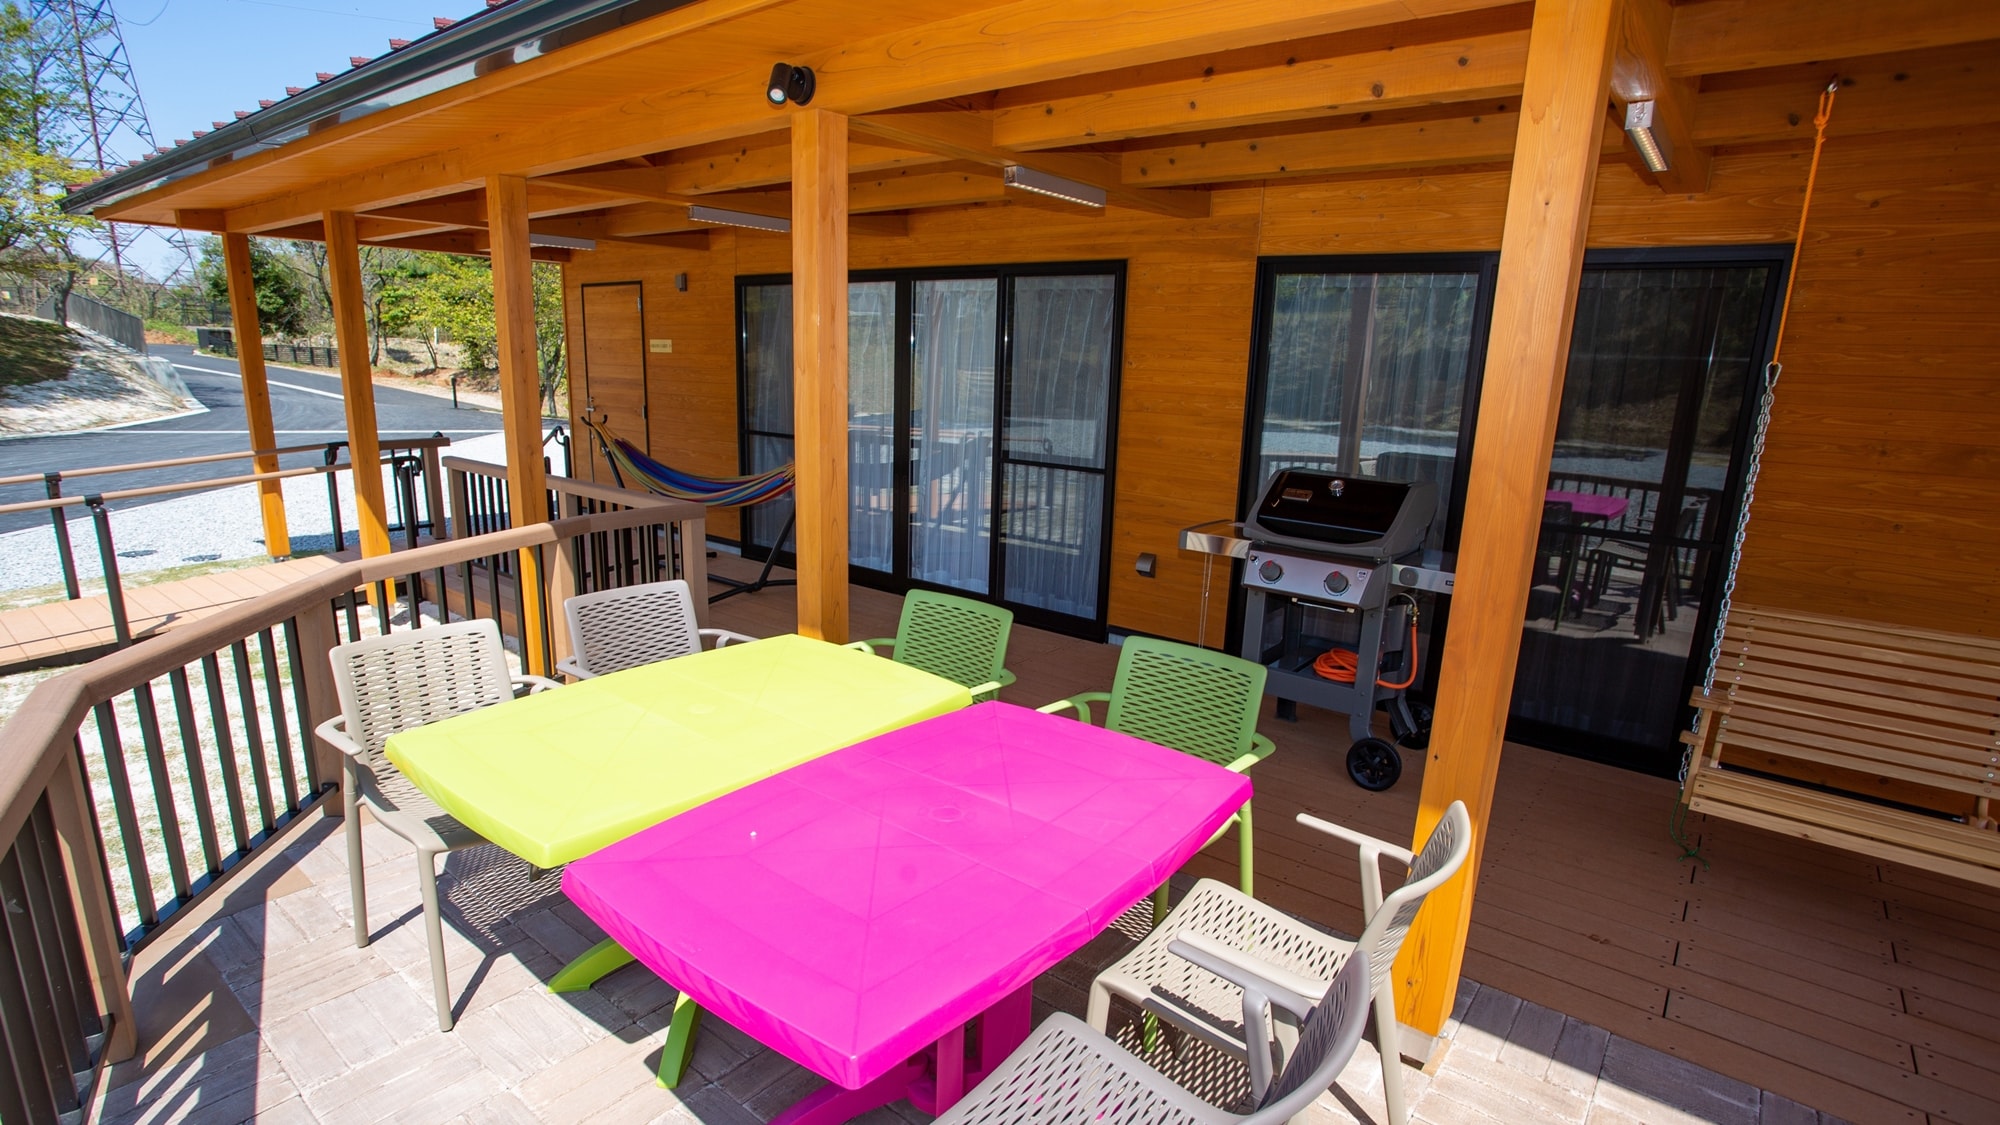 * [Grand Cabin] Gas grills and chairs are permanently installed on the deck. It is an outdoor living room where you can easily enjoy BBQ.